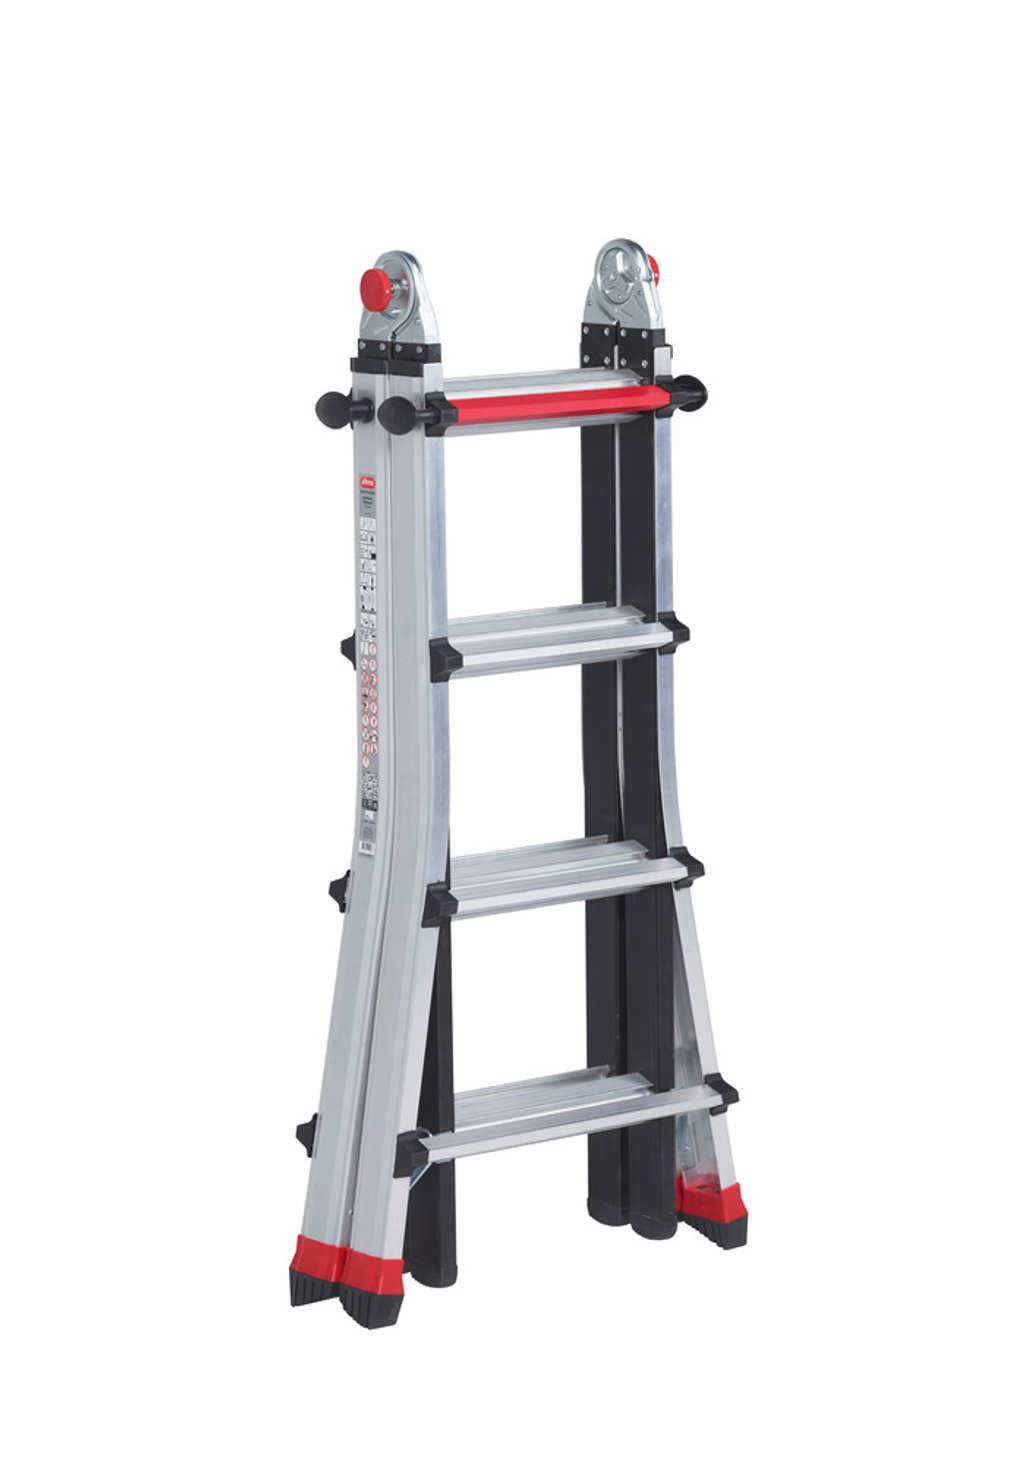 Rent the professional folding ladder 4x4 steps 5m from Altrex at BIYU. Sturdy aluminum ladder with various application possibilities.